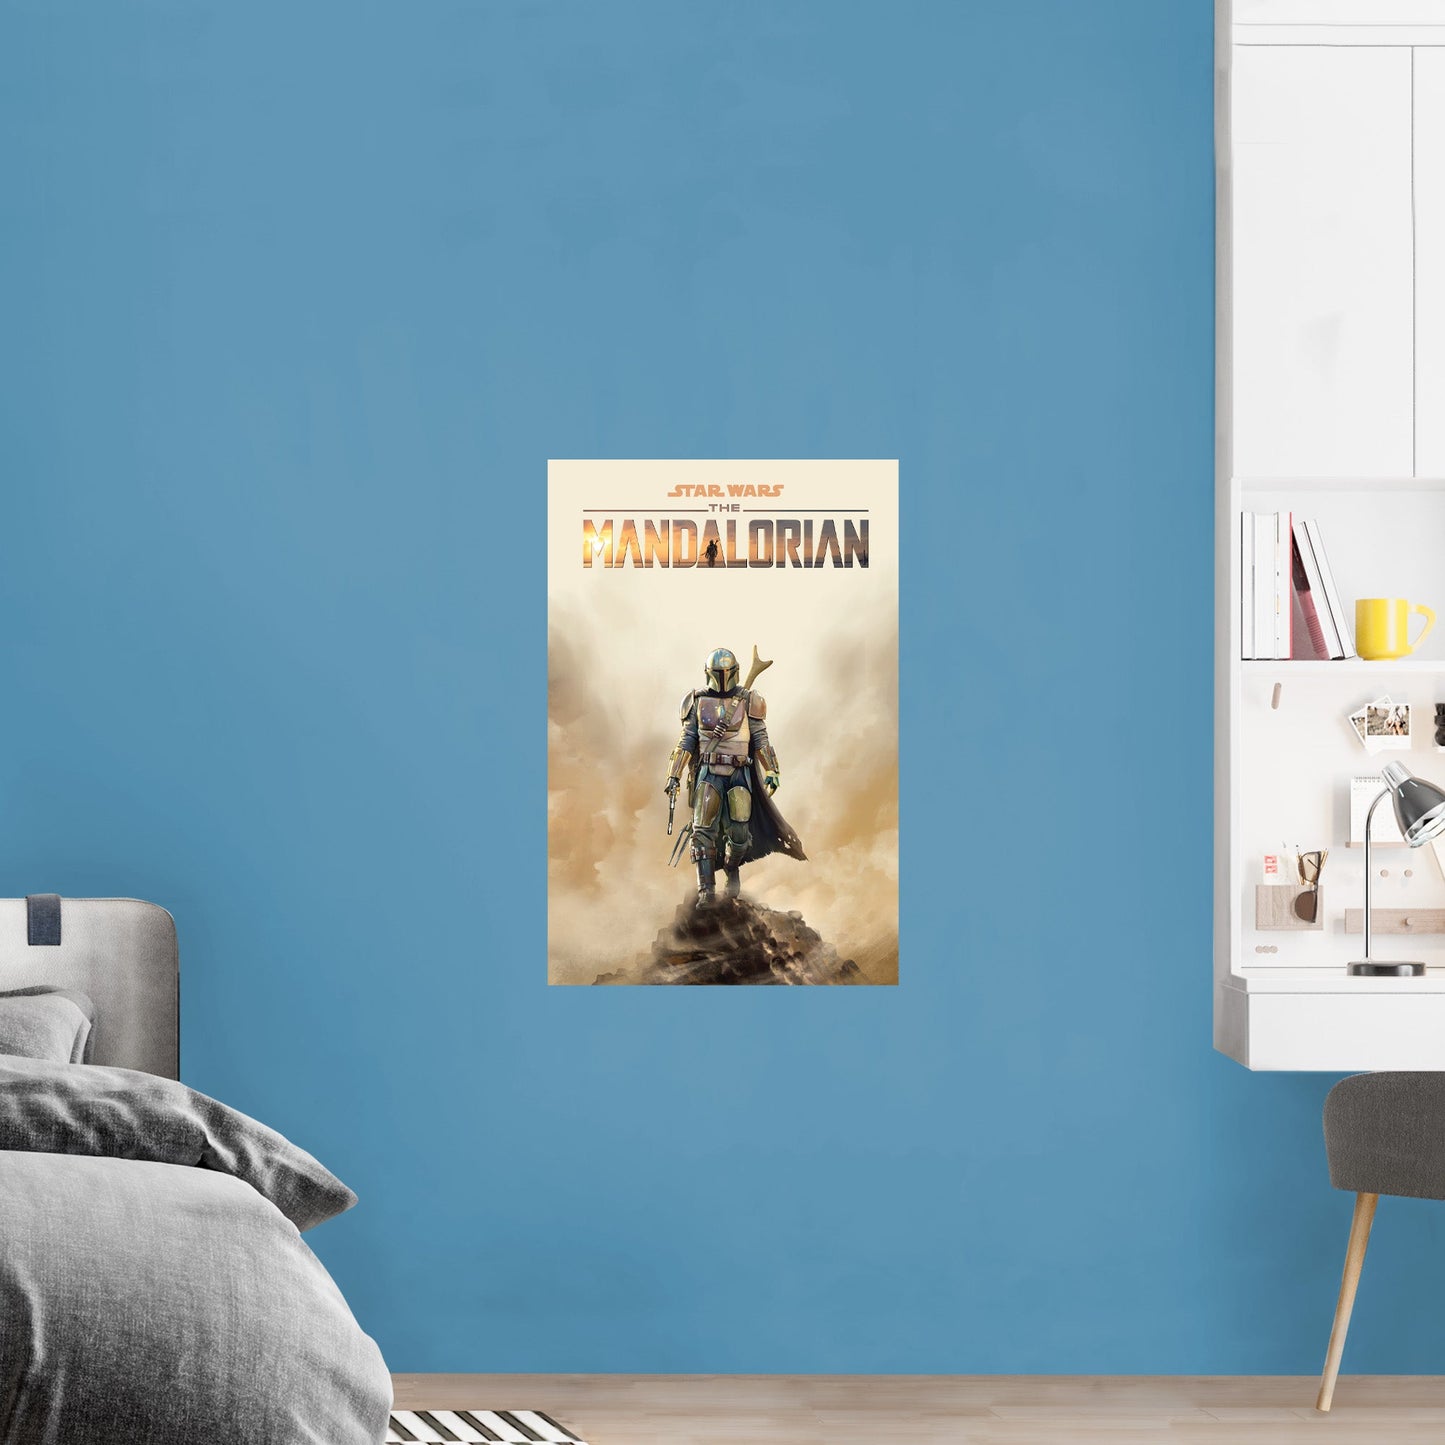 The Mandalorian: The Mandalorian Series Poster - Officially Licensed Star Wars Removable Adhesive Decal